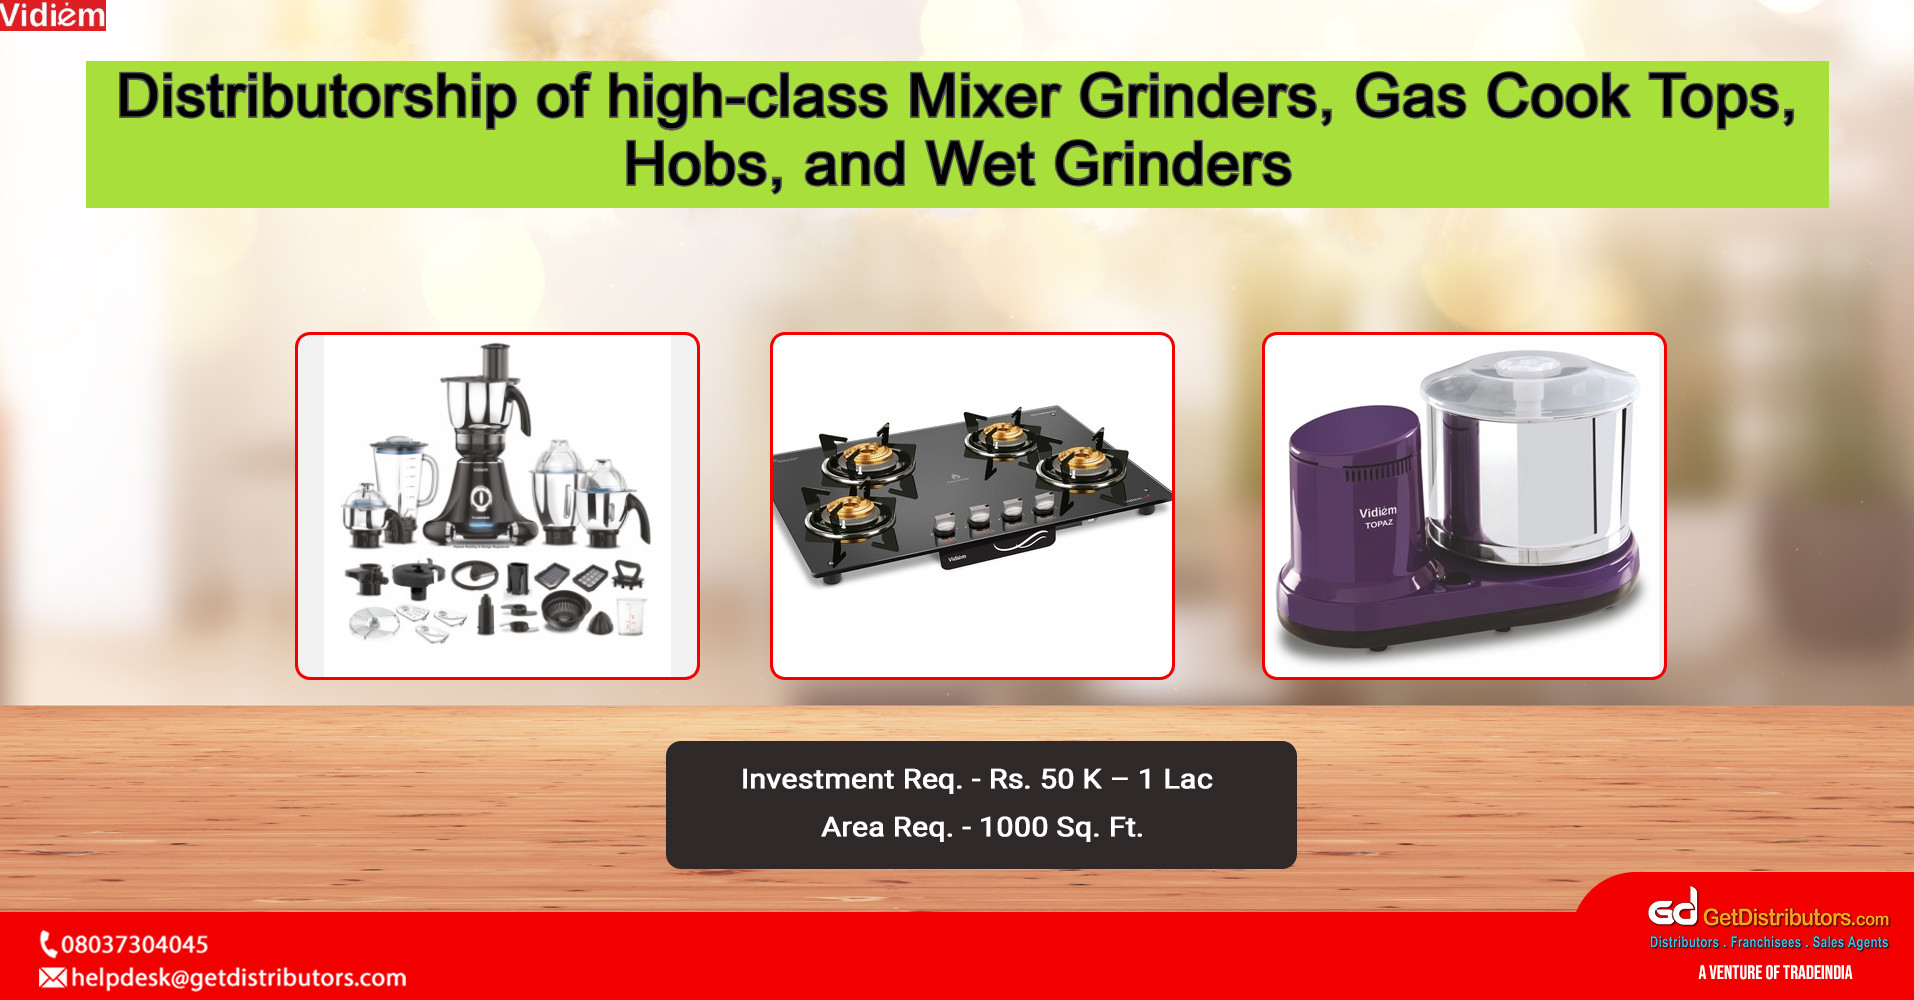 Distributorship of high-class Mixer Grinders, Gas Cook Tops, Hobs, and Wet Grinders